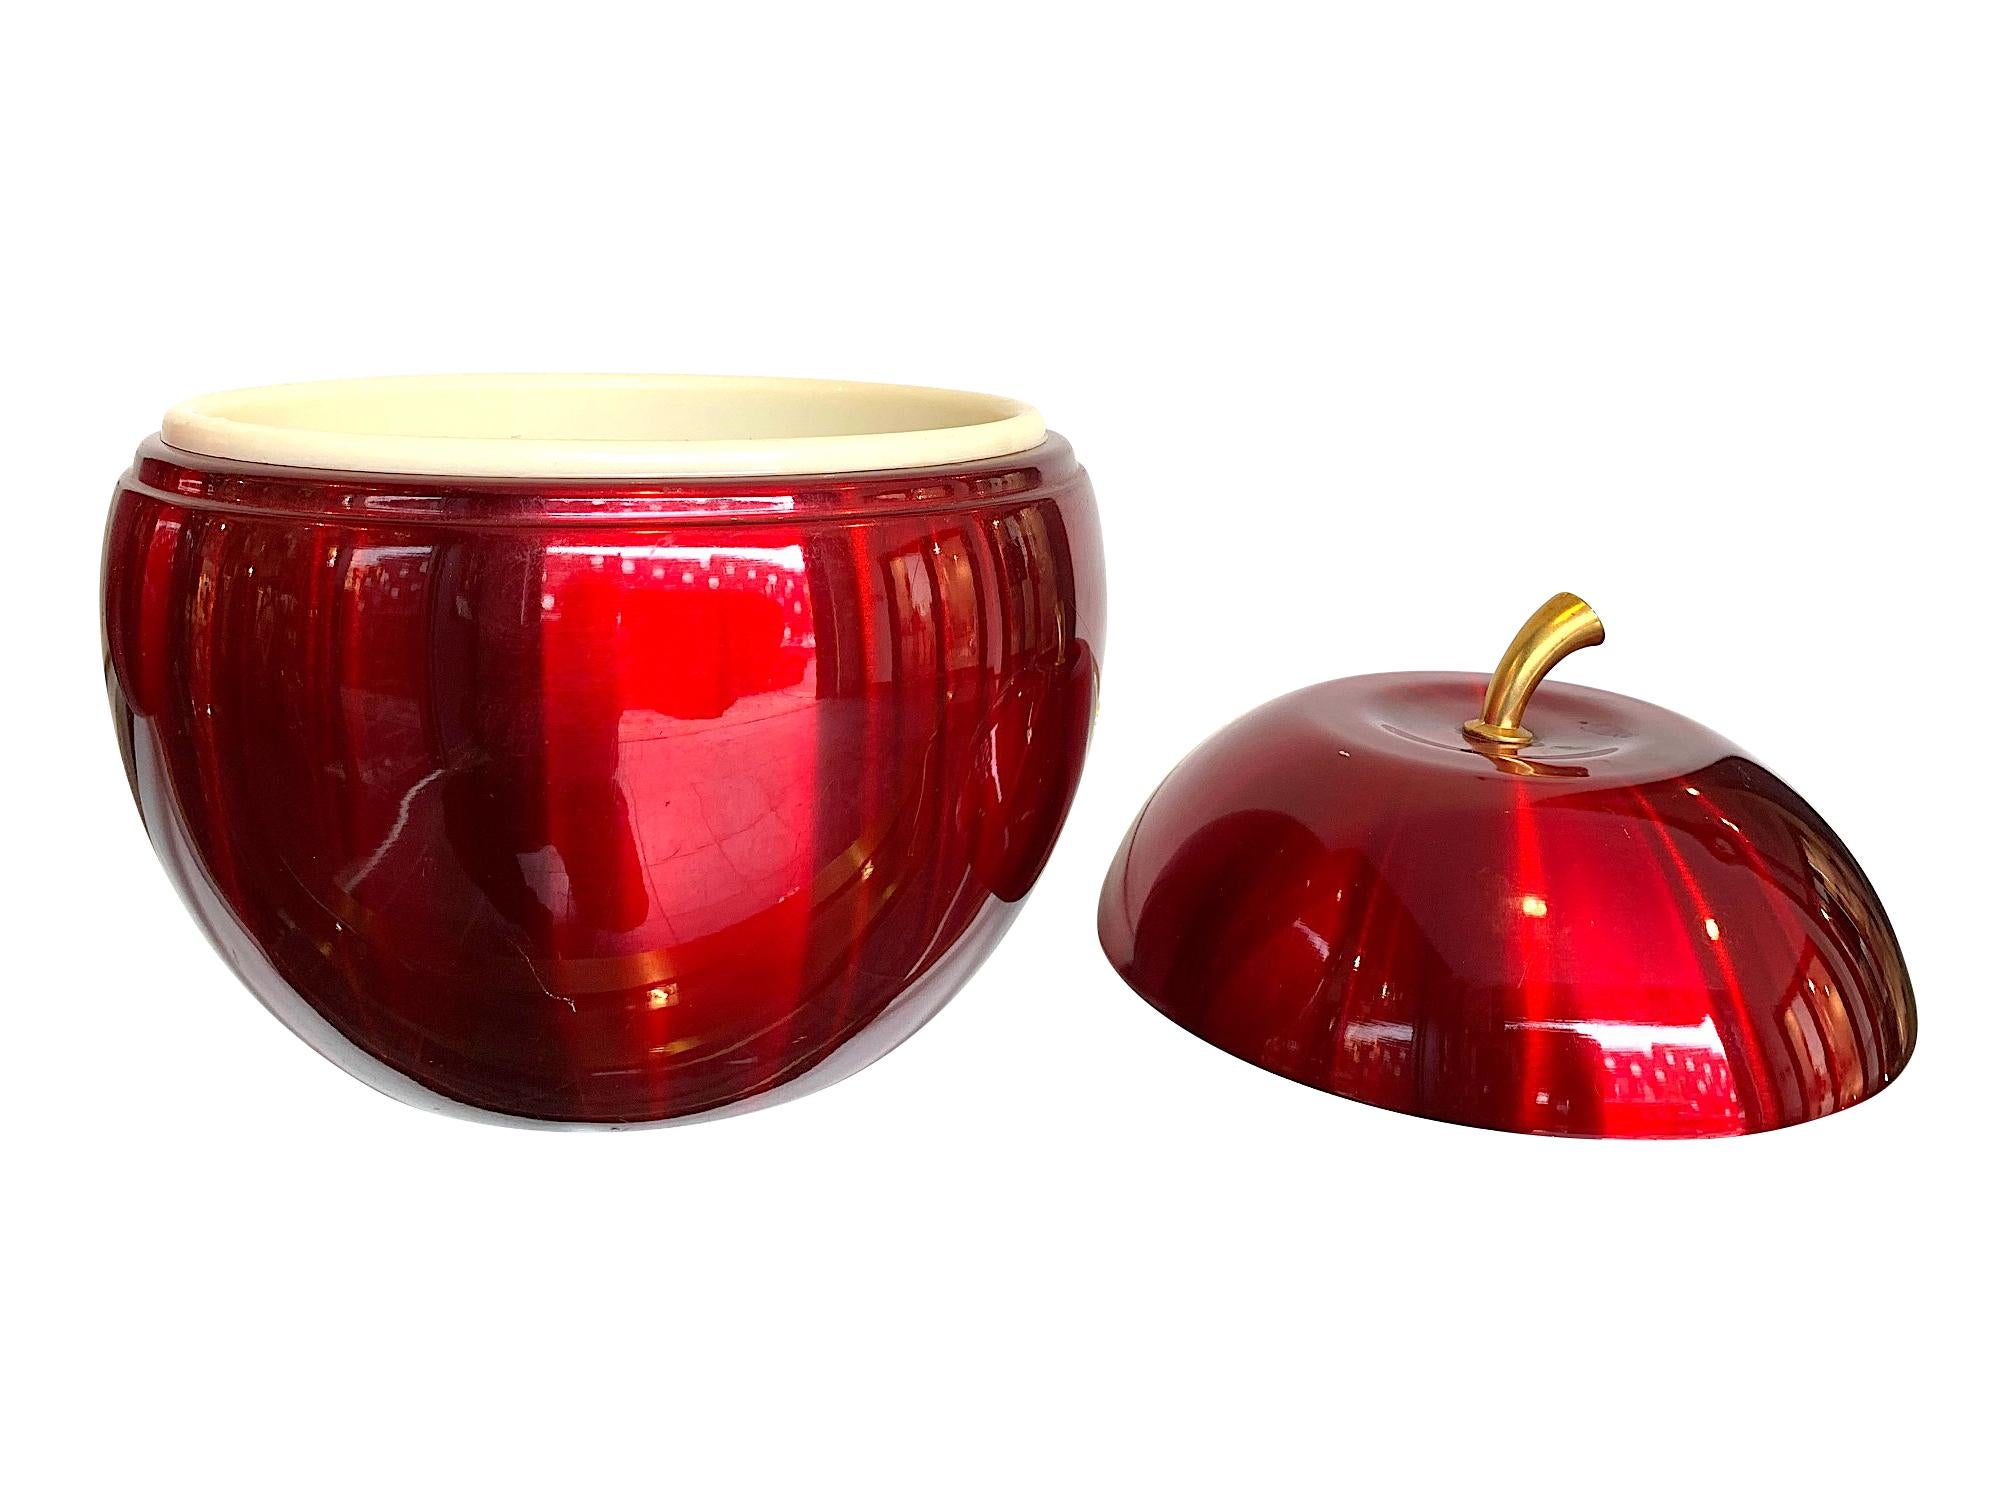 Anodized 1970s Apple Ice Bucket by Daydream in Anodised Vibrant Red with Brass Handle